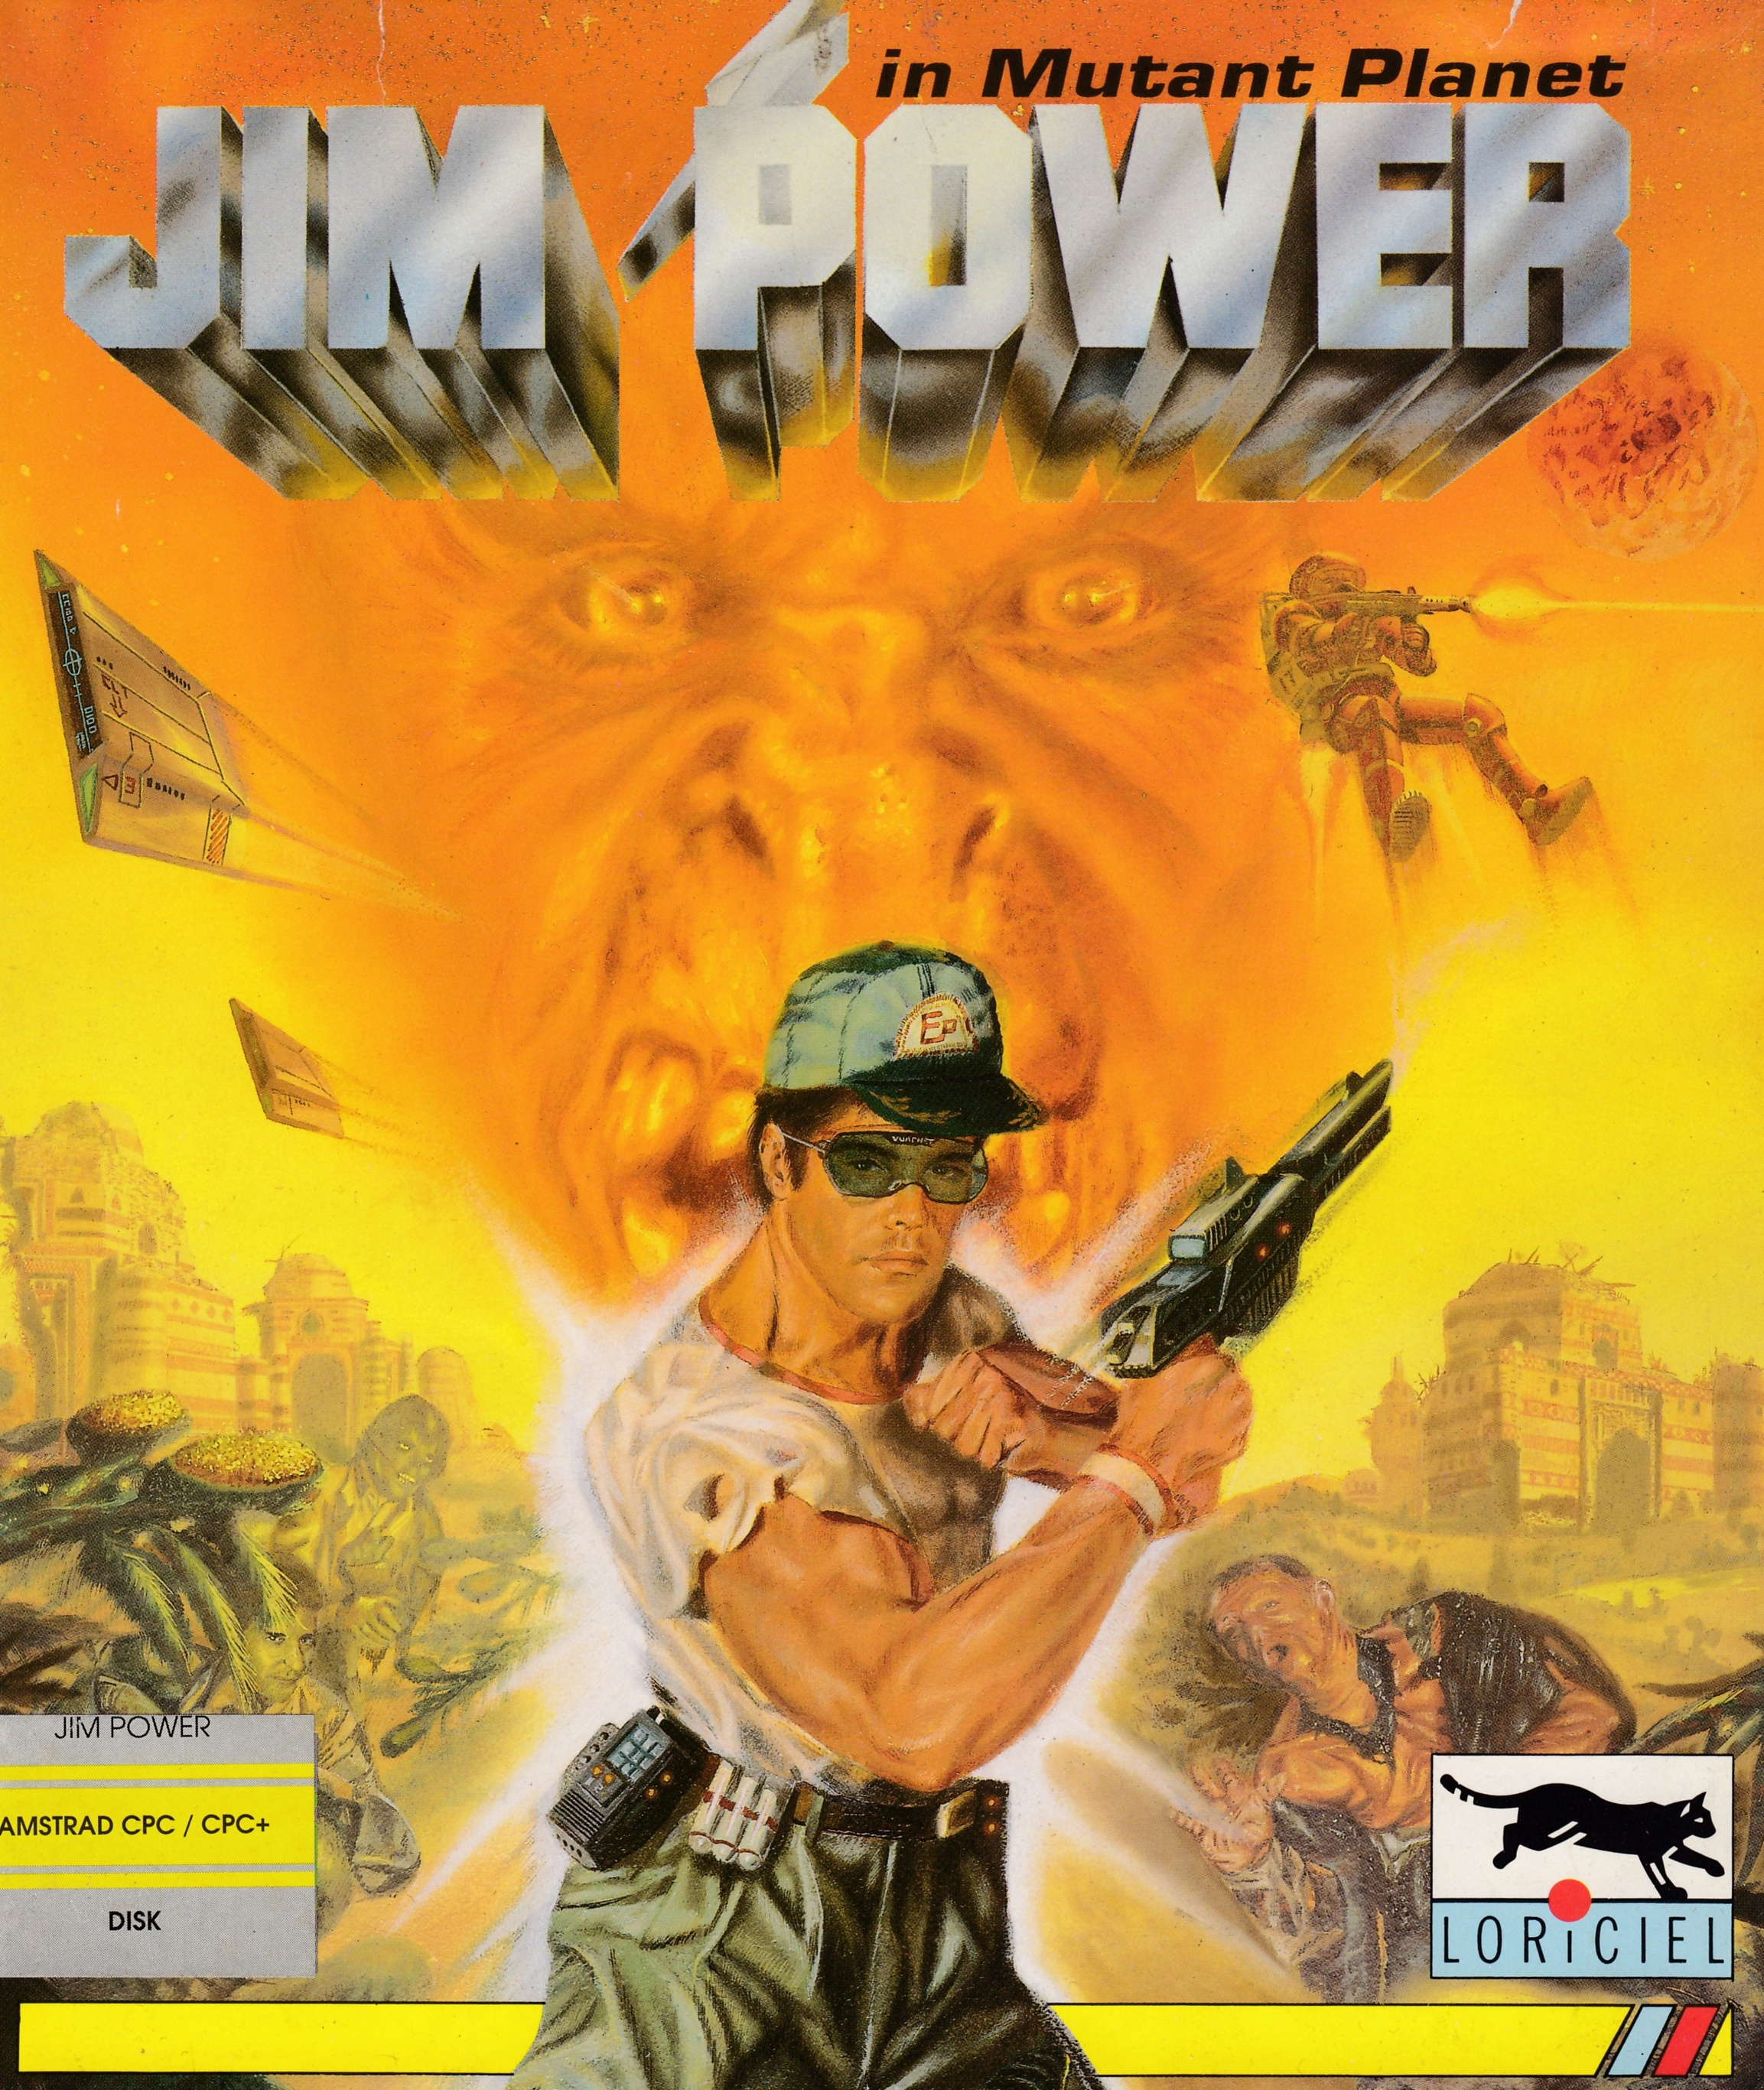 screenshot of the Amstrad CPC game Jim power by GameBase CPC